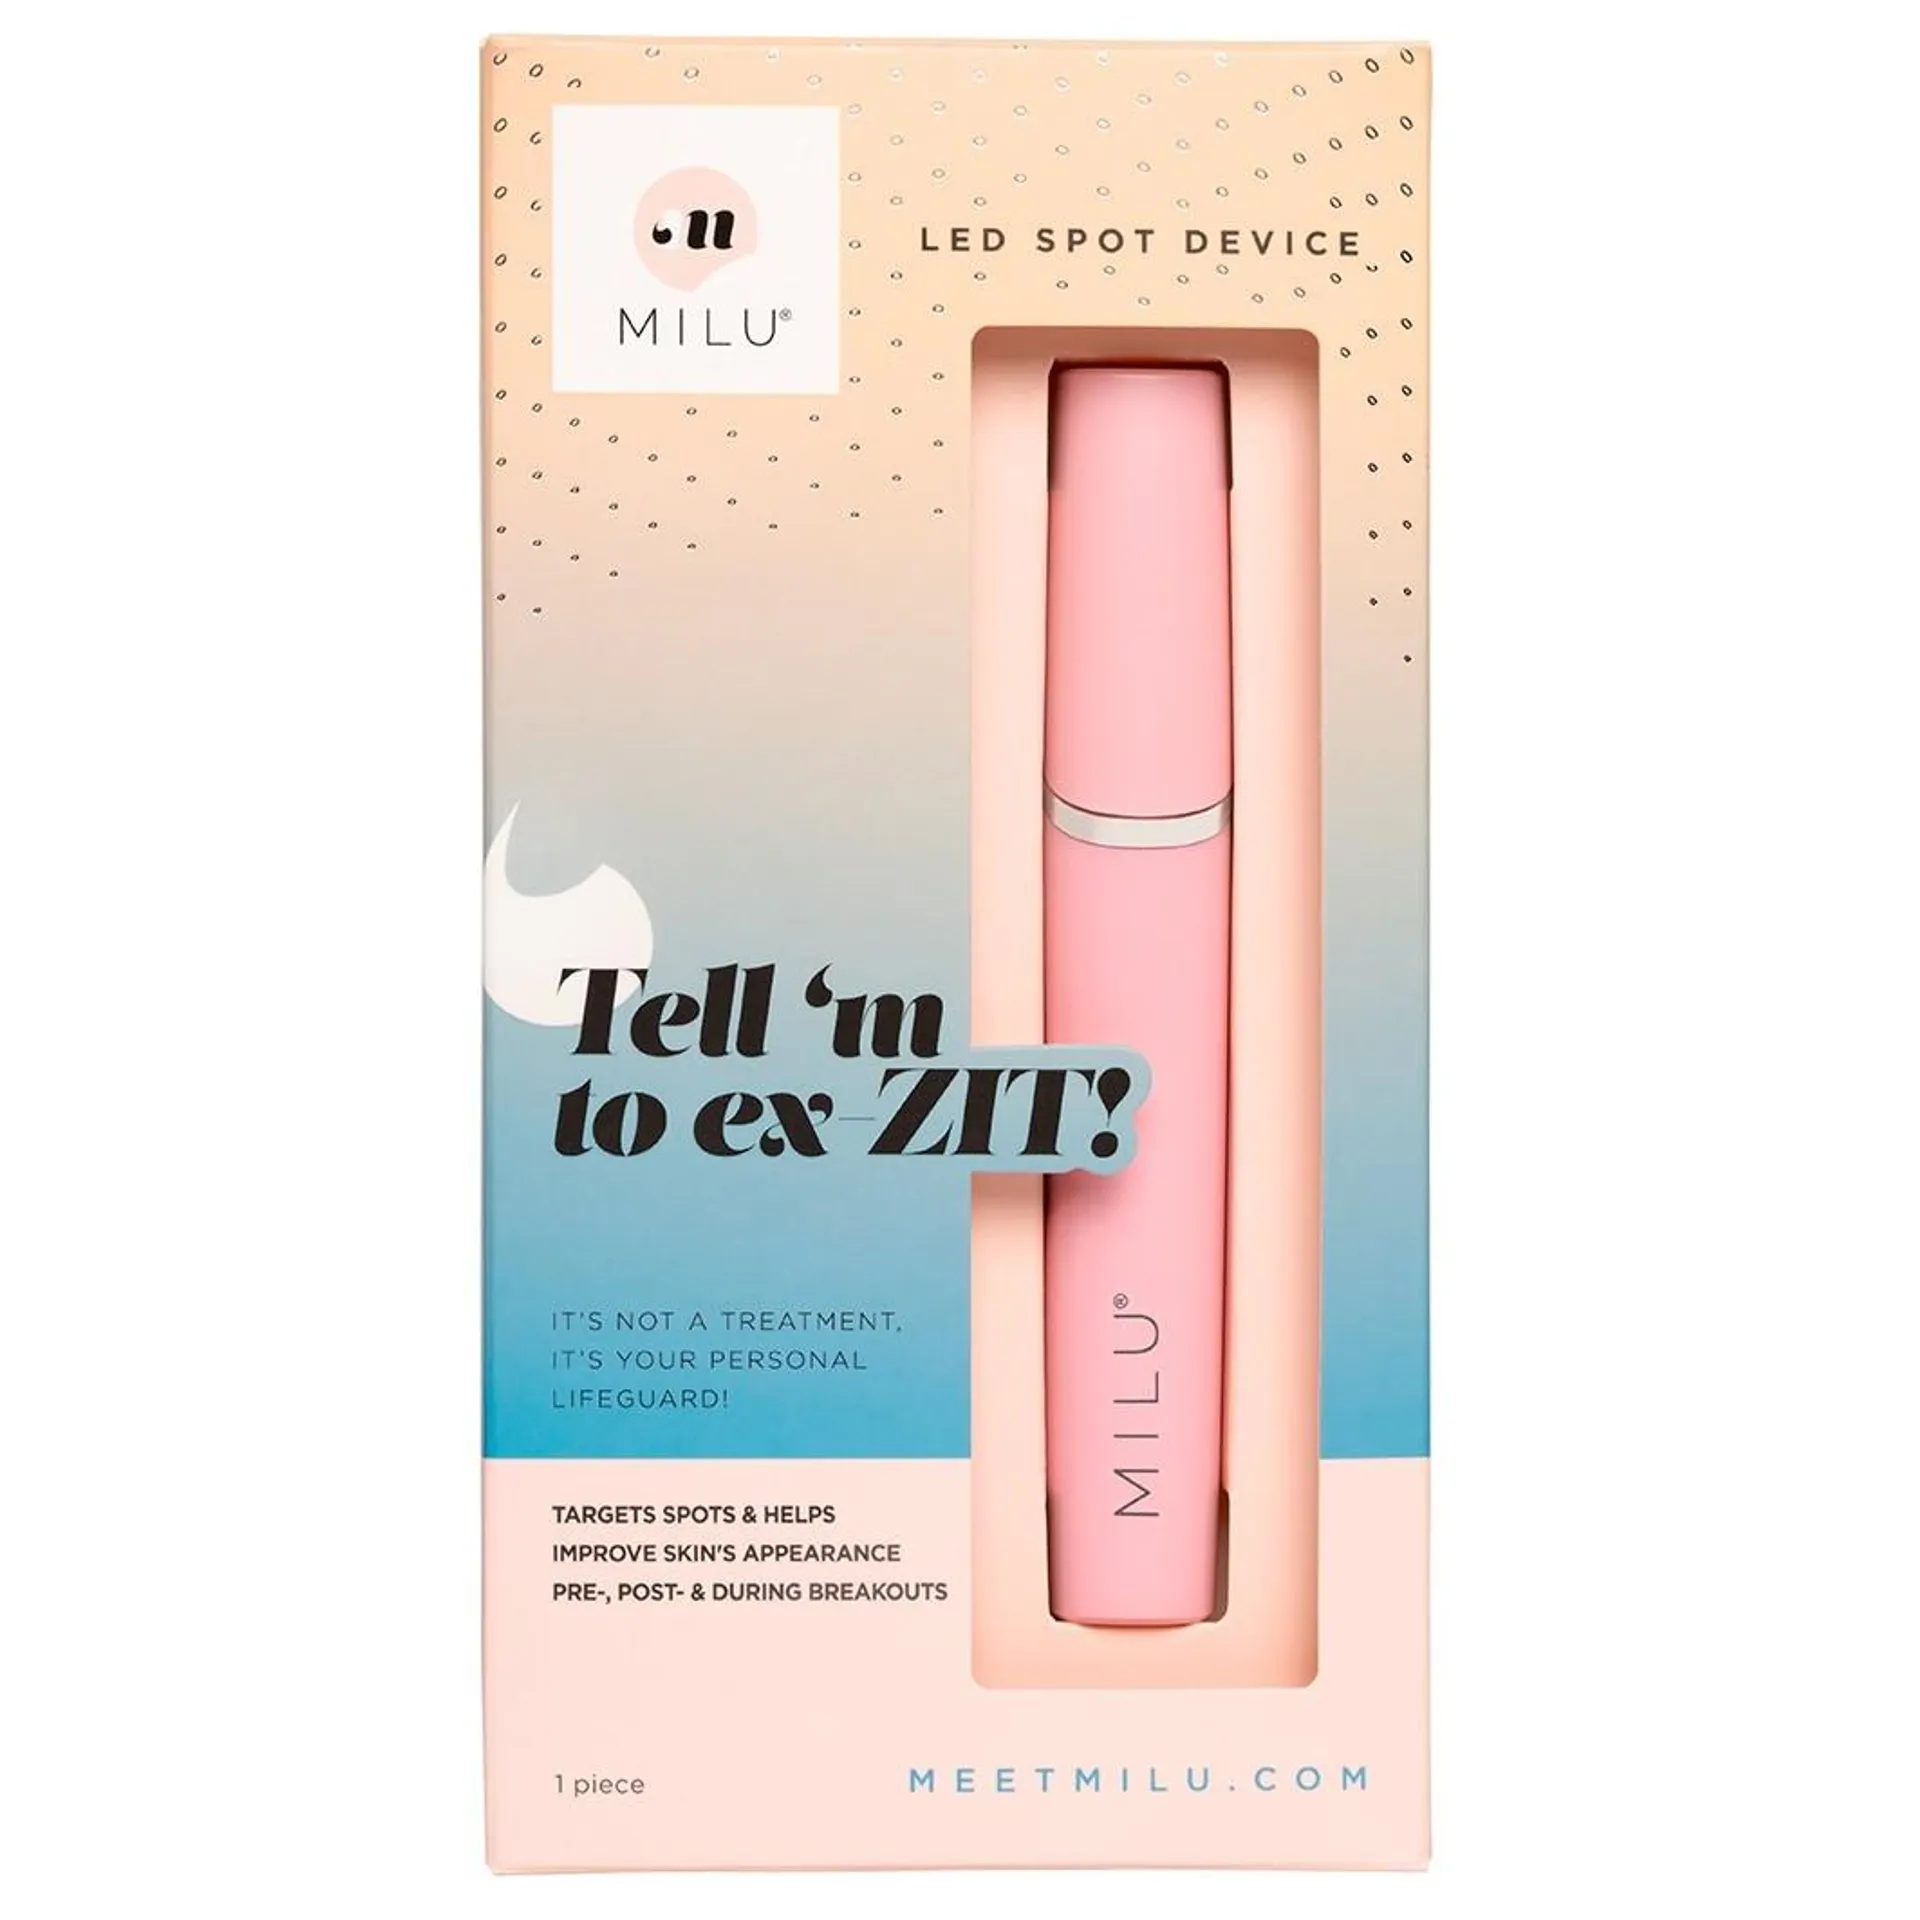 Tell 'm to ex-ZIT. LED Spot Device